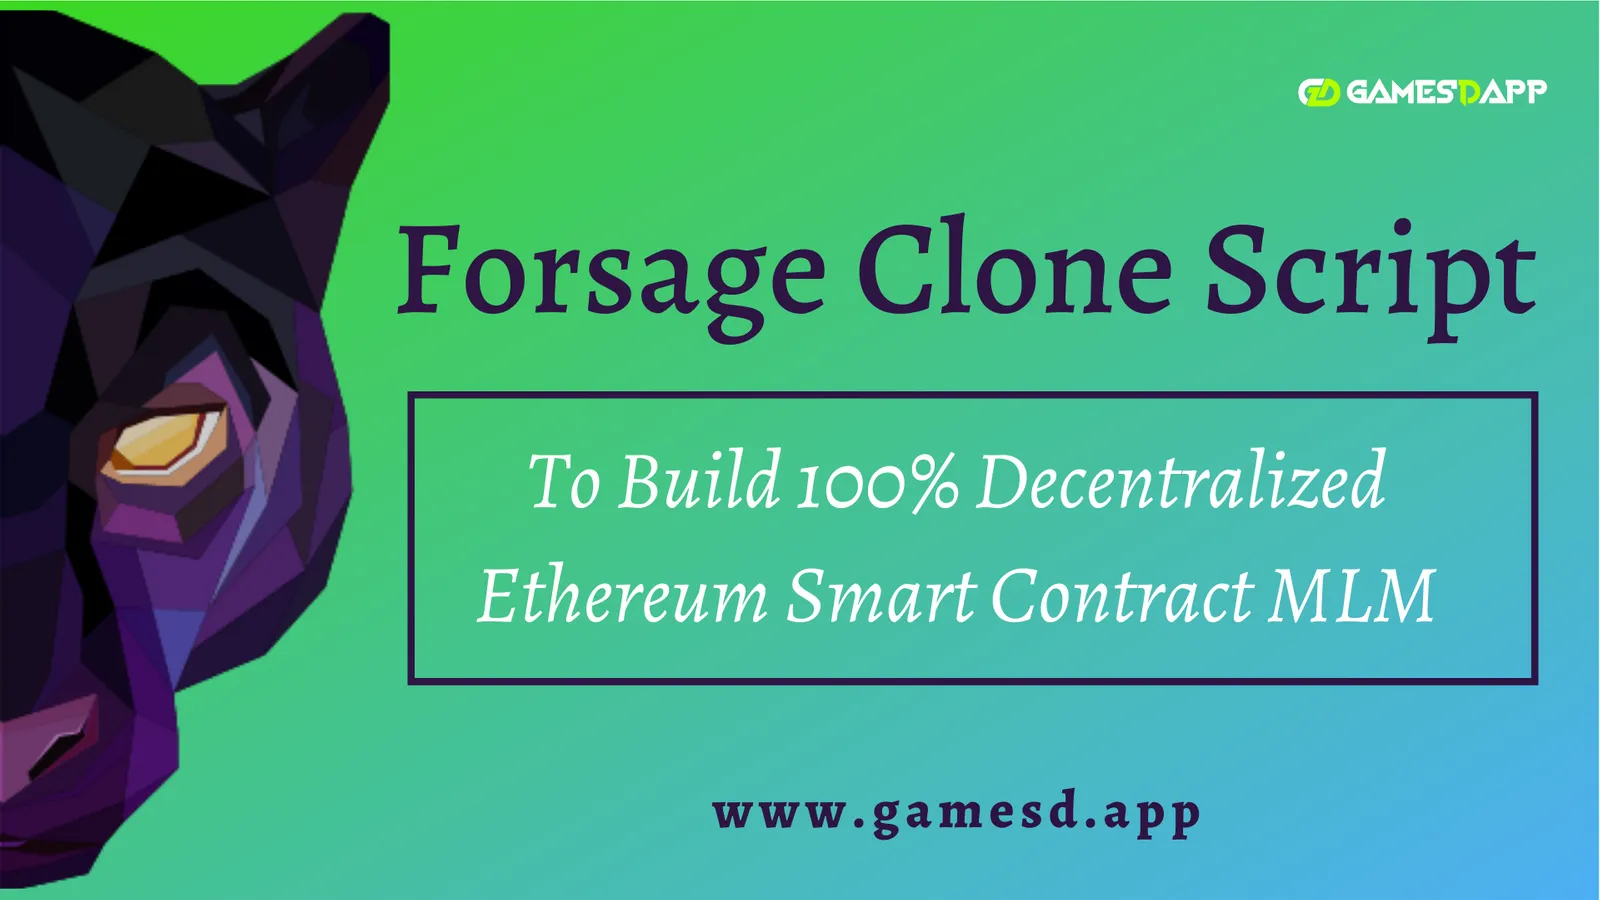 Forsage Clone Script - To create Cryptocurrency MLM Platform with Ethereum Smart-contract